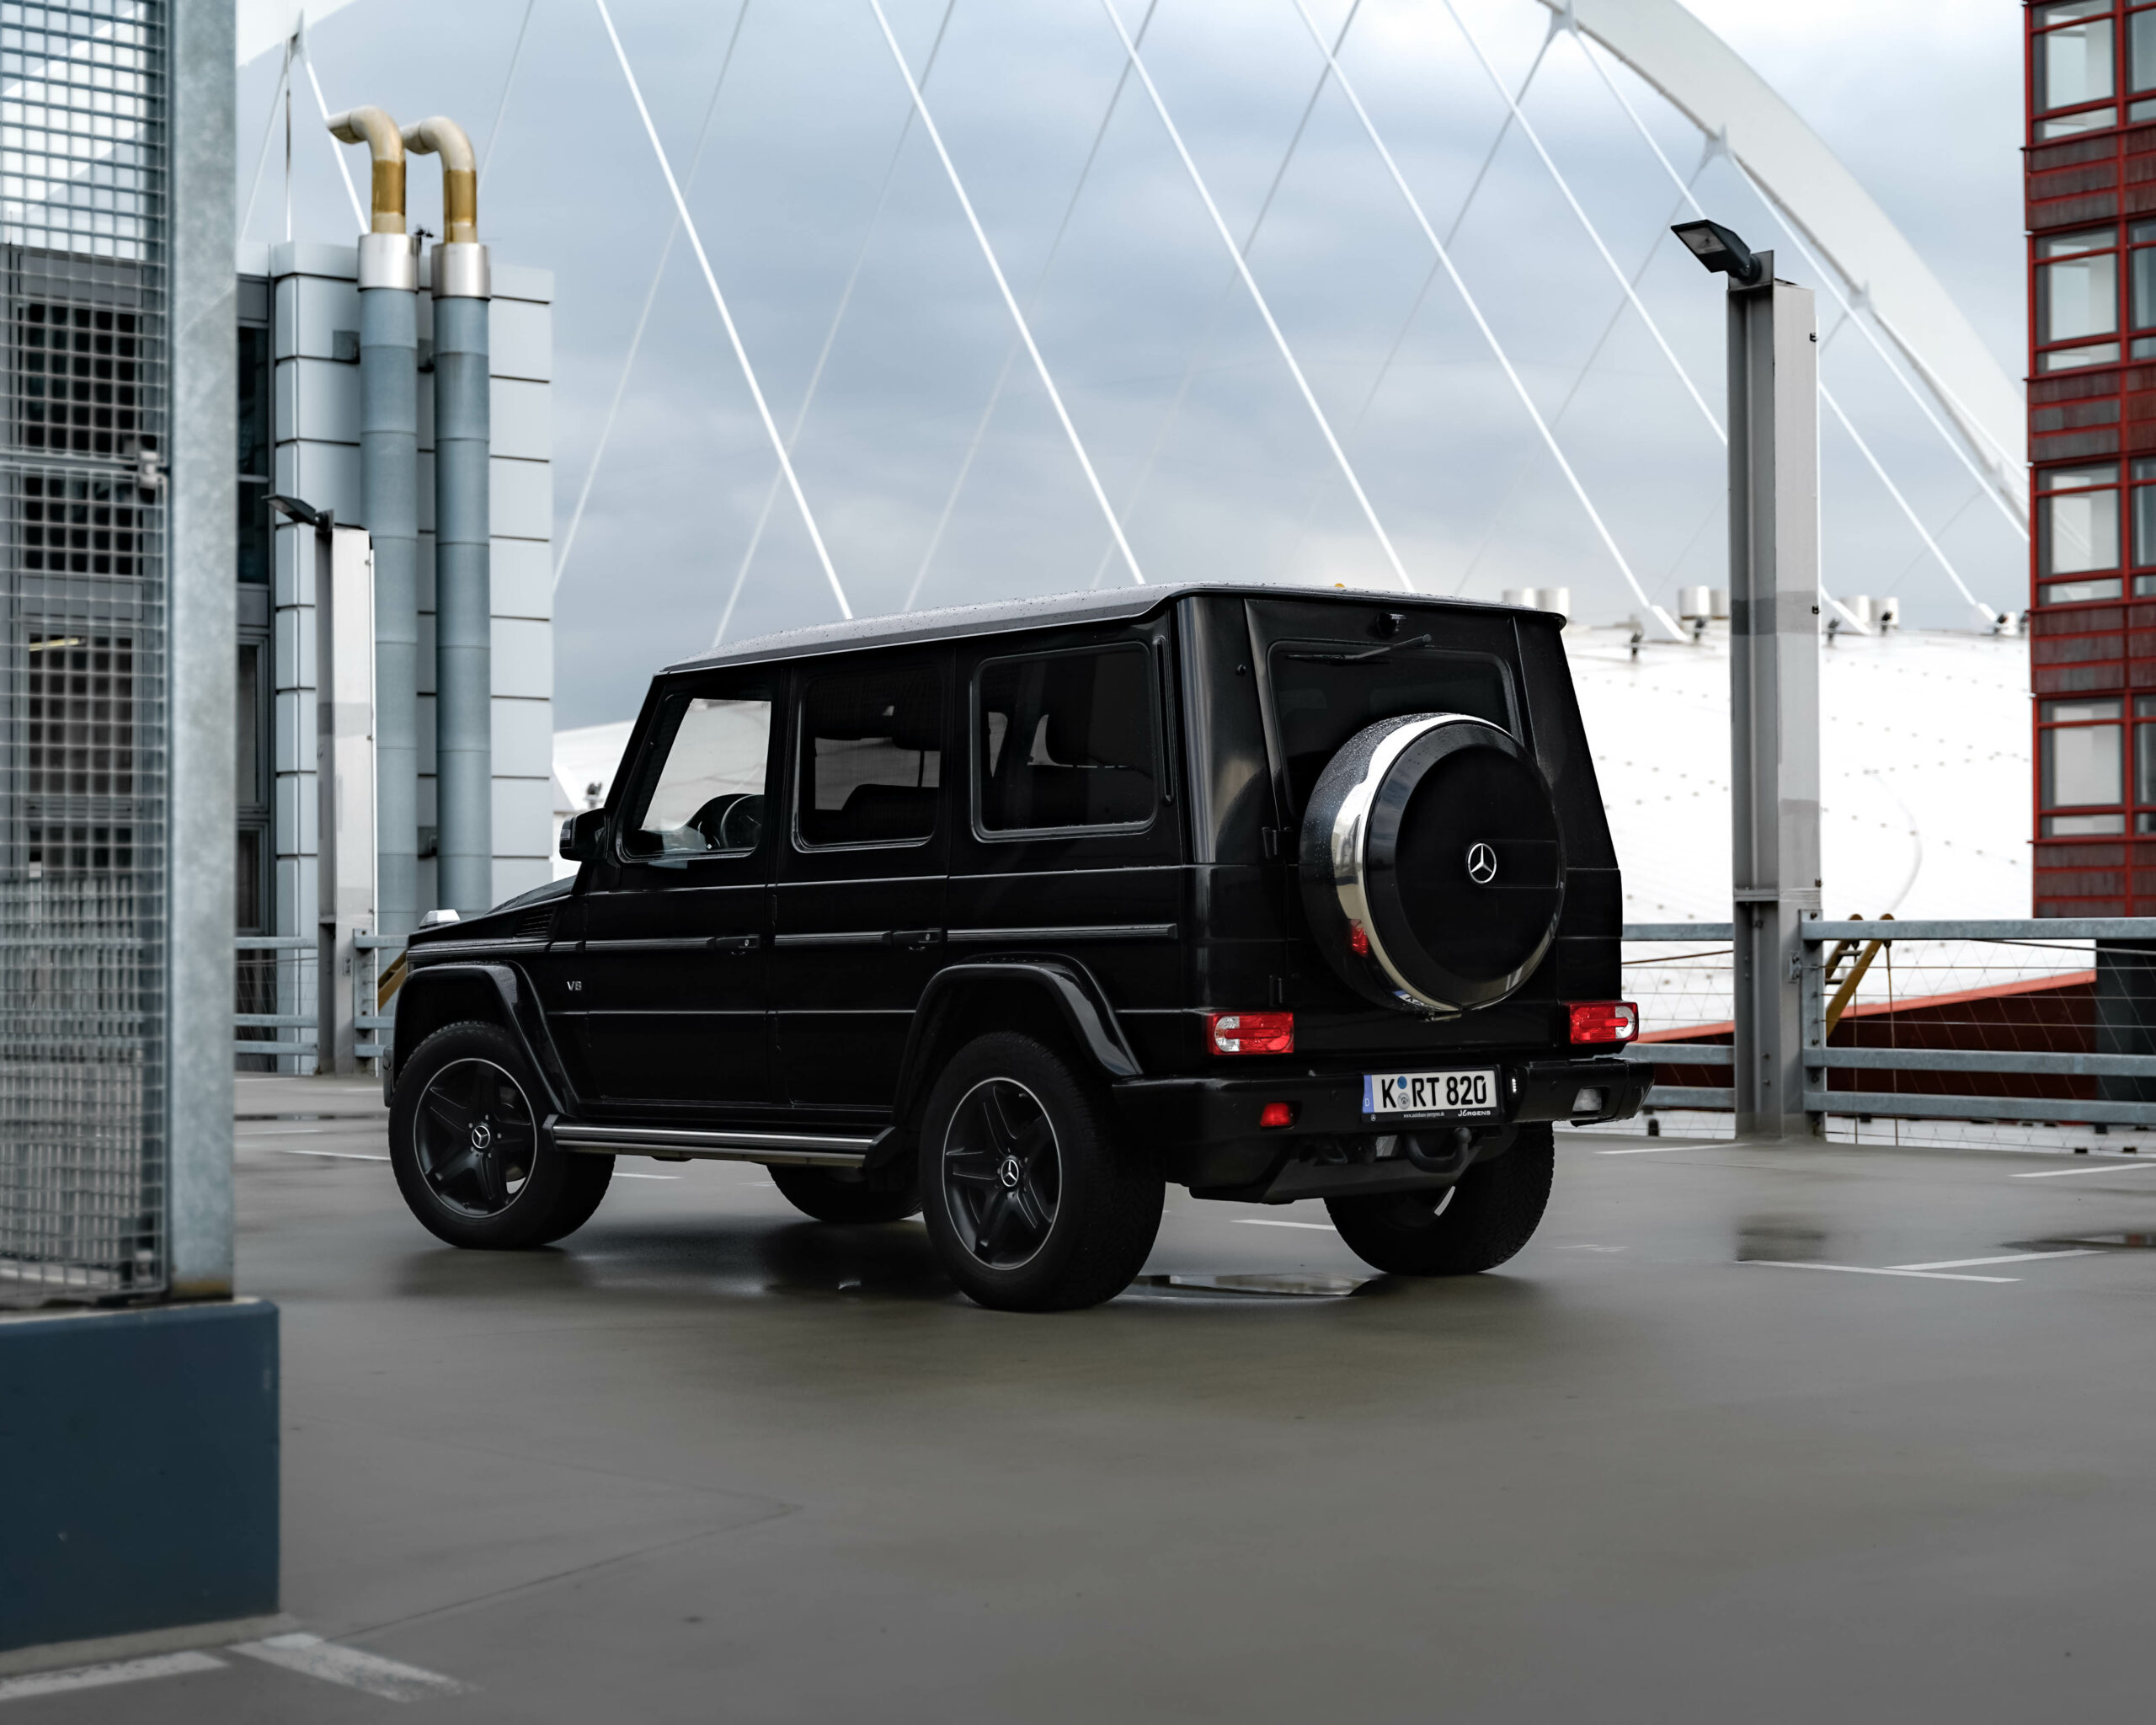 Mercedes G500 side view rent time back view cologne